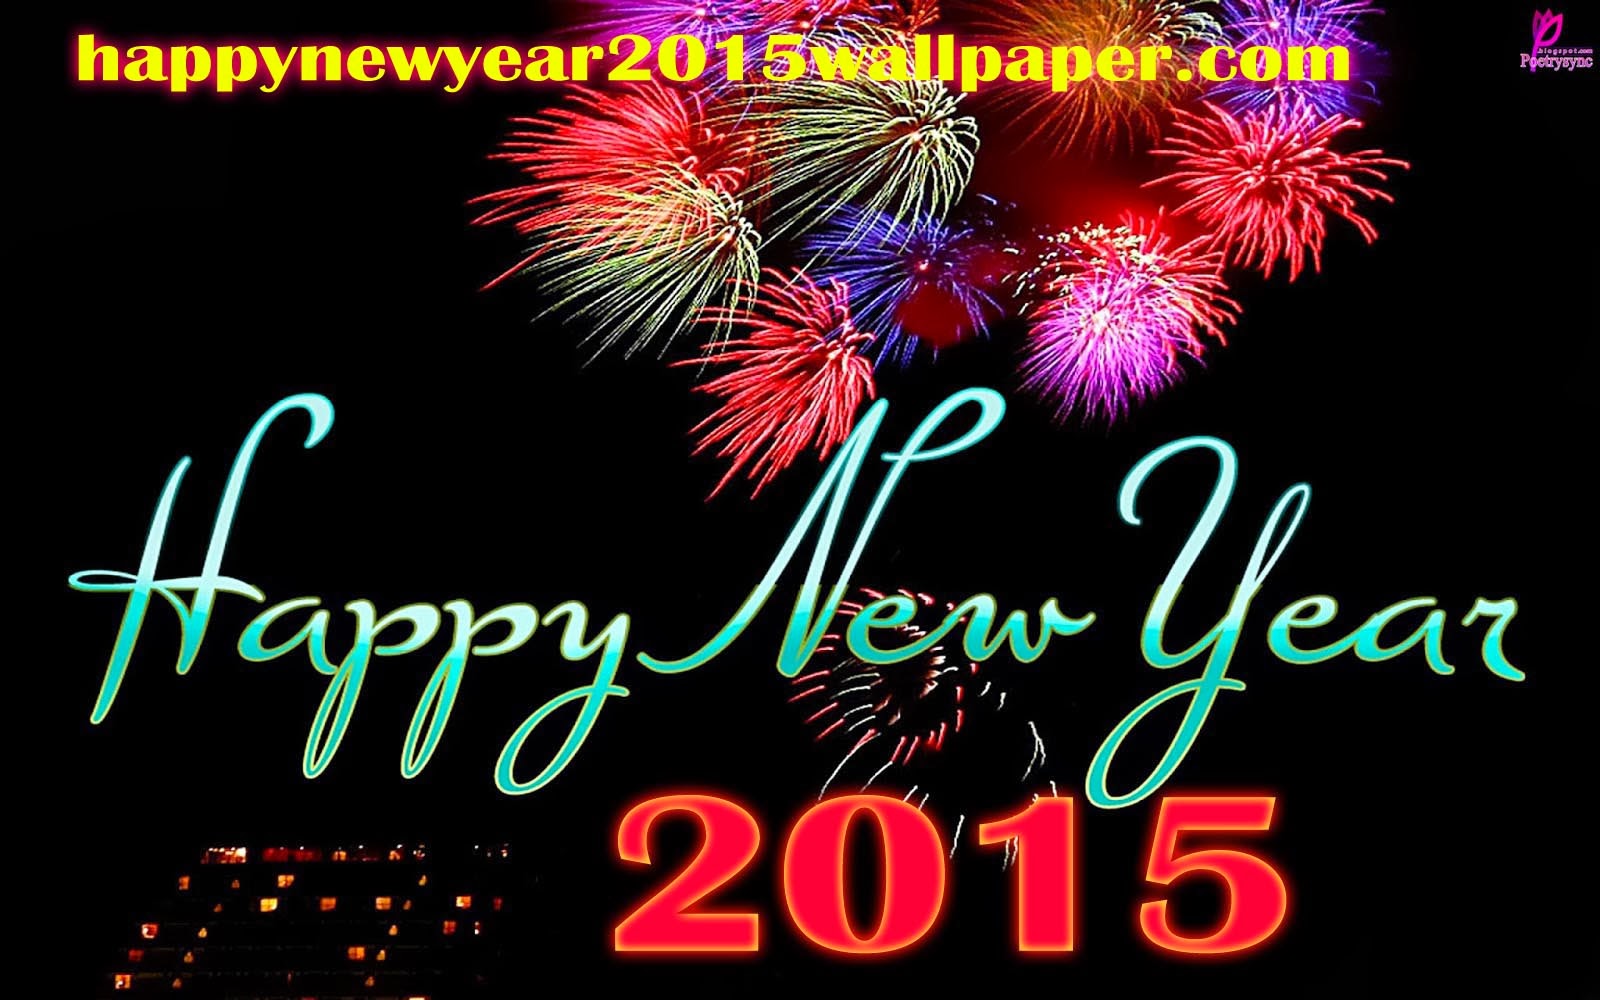 For Happy New Year Wallpaper Wishes